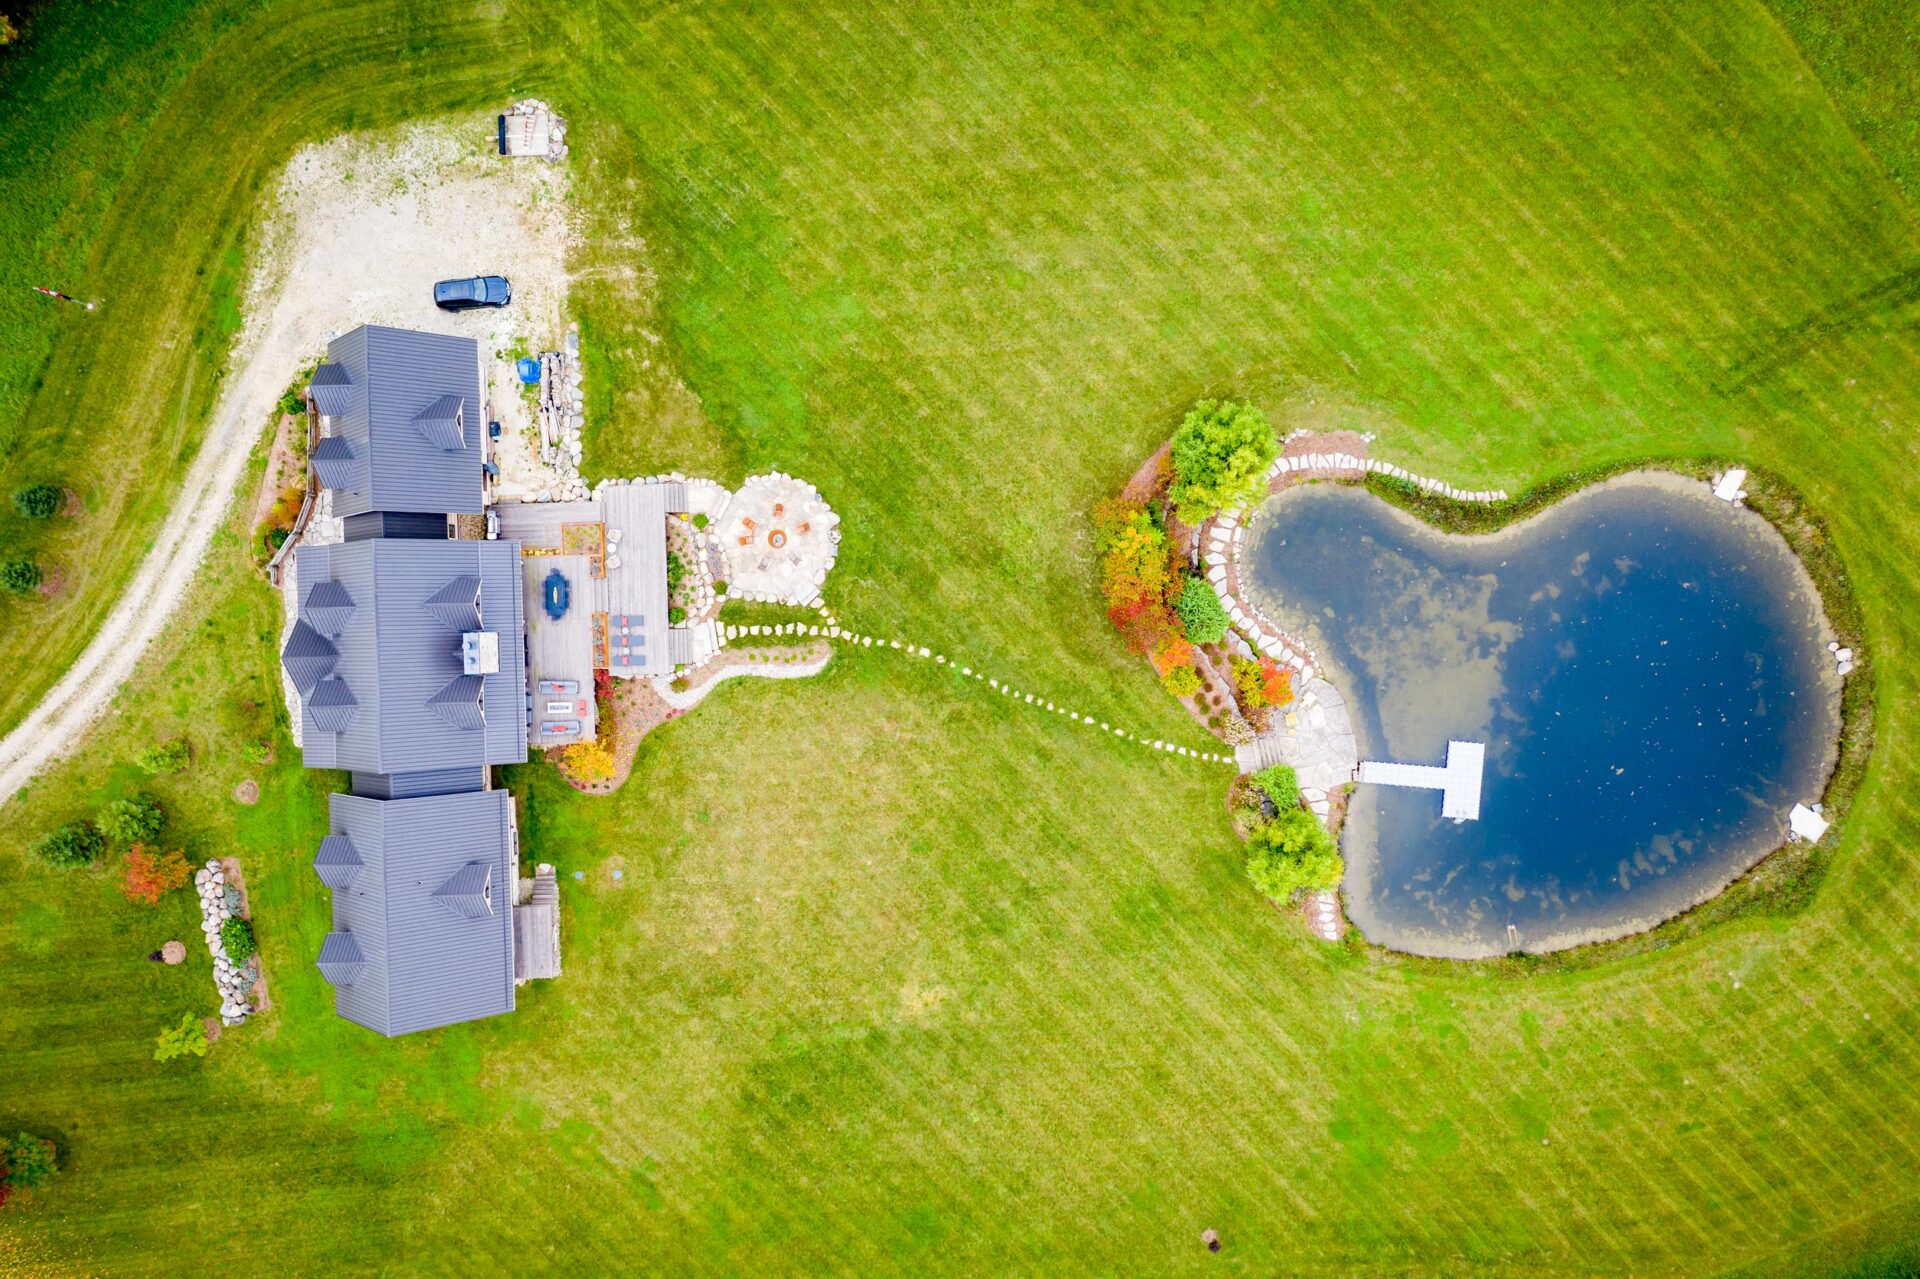 Aerial view of a property with a large house, landscaped garden, and heart-shaped pond, surrounded by expansive green lawns and a driveway.